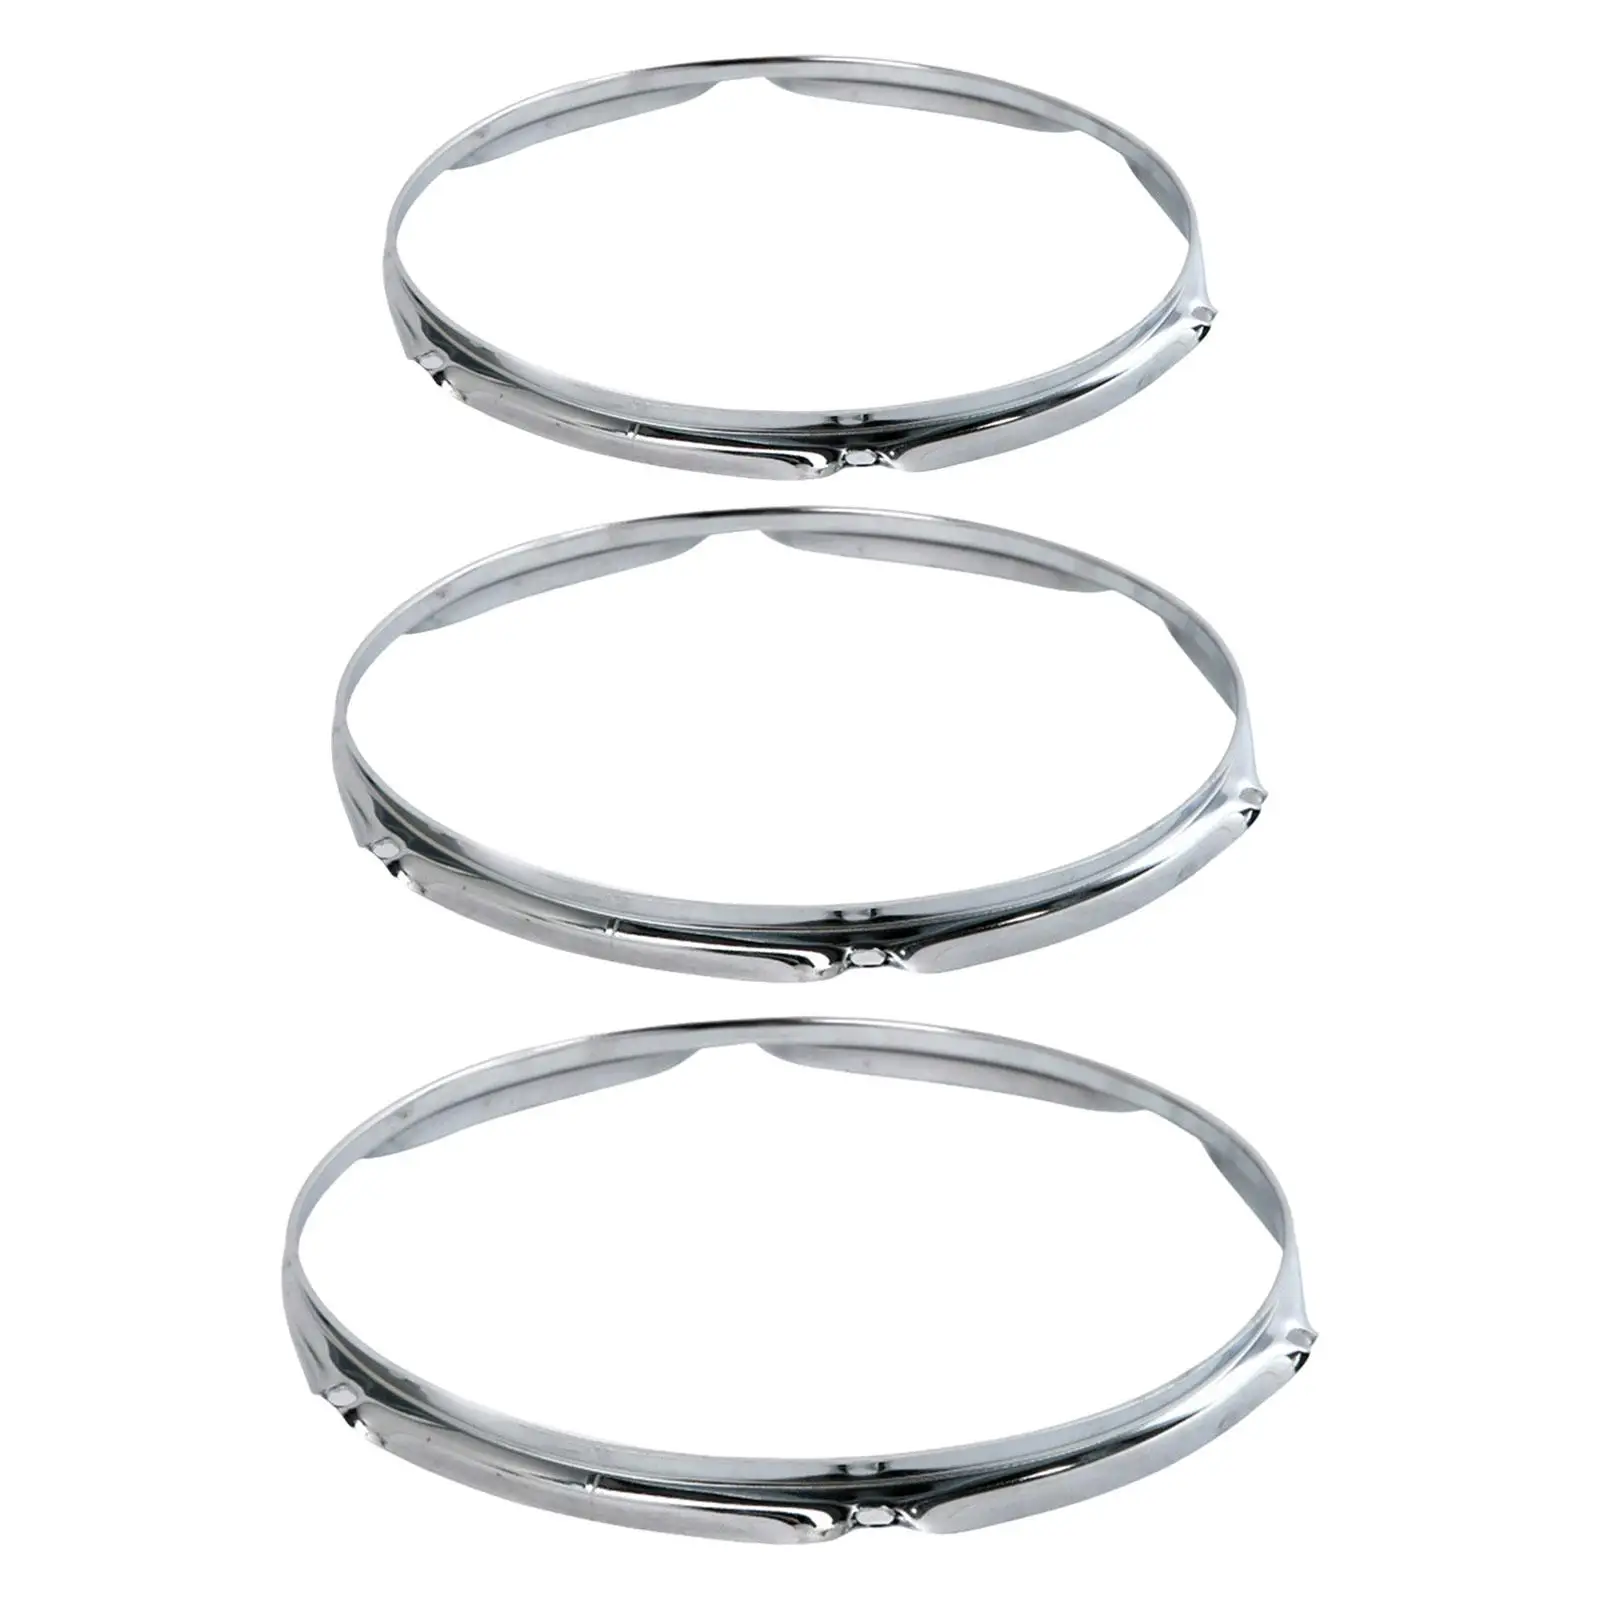 Snare Drum Batter Heavy Duty Portable Replacement Musical Accessory 6 Hole Drum Rim for Maintain Daily Use Repair Office Show